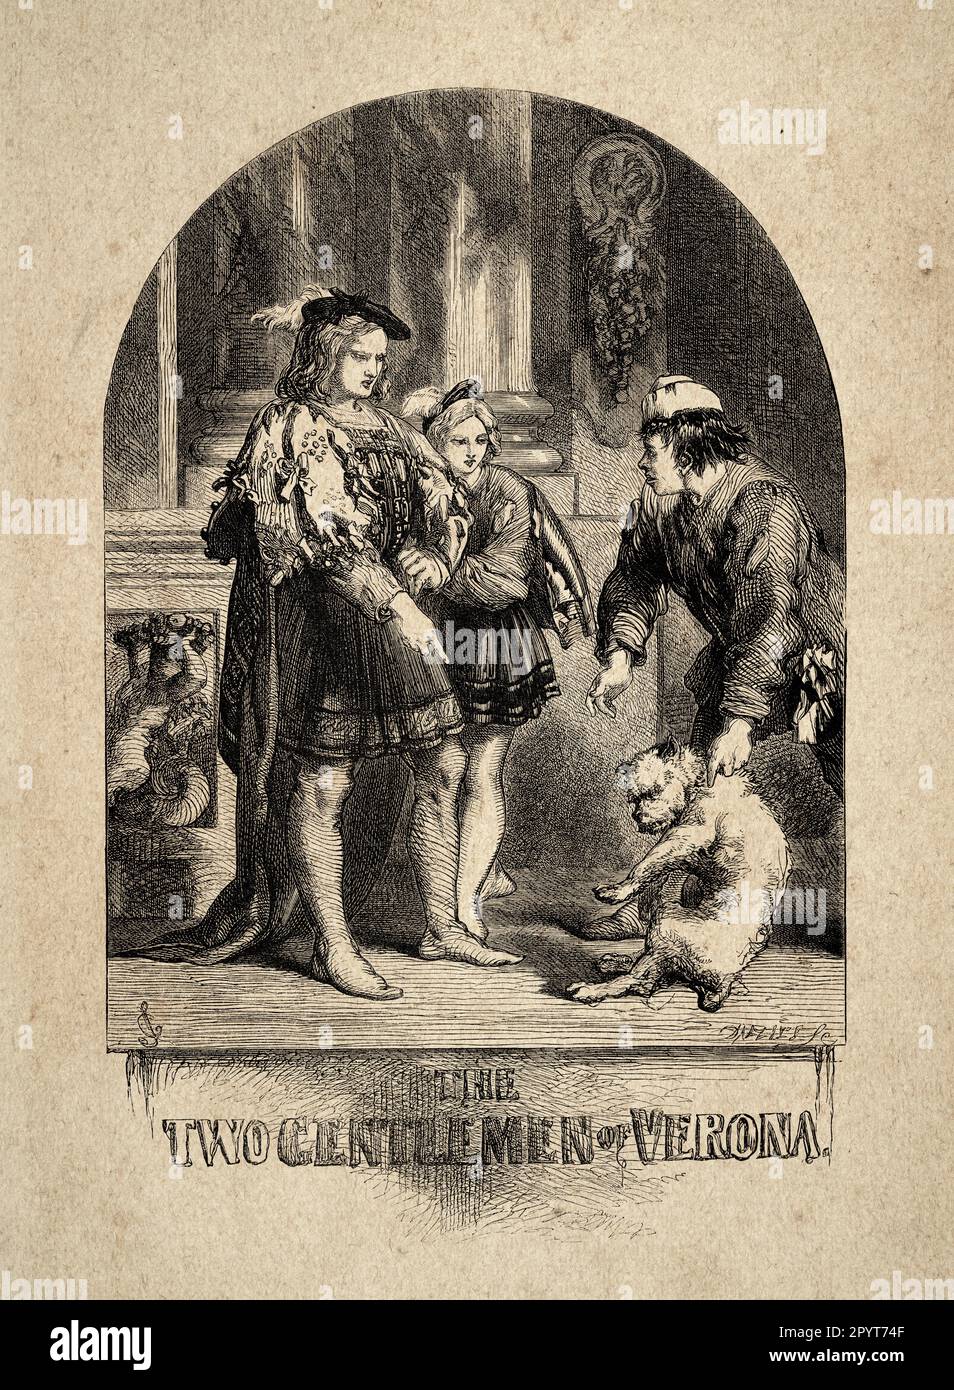 Vintage illustration Scene from The Two Gentlemen of Verona by William Shakespeare, by John Gilbert 19th Century Stock Photo